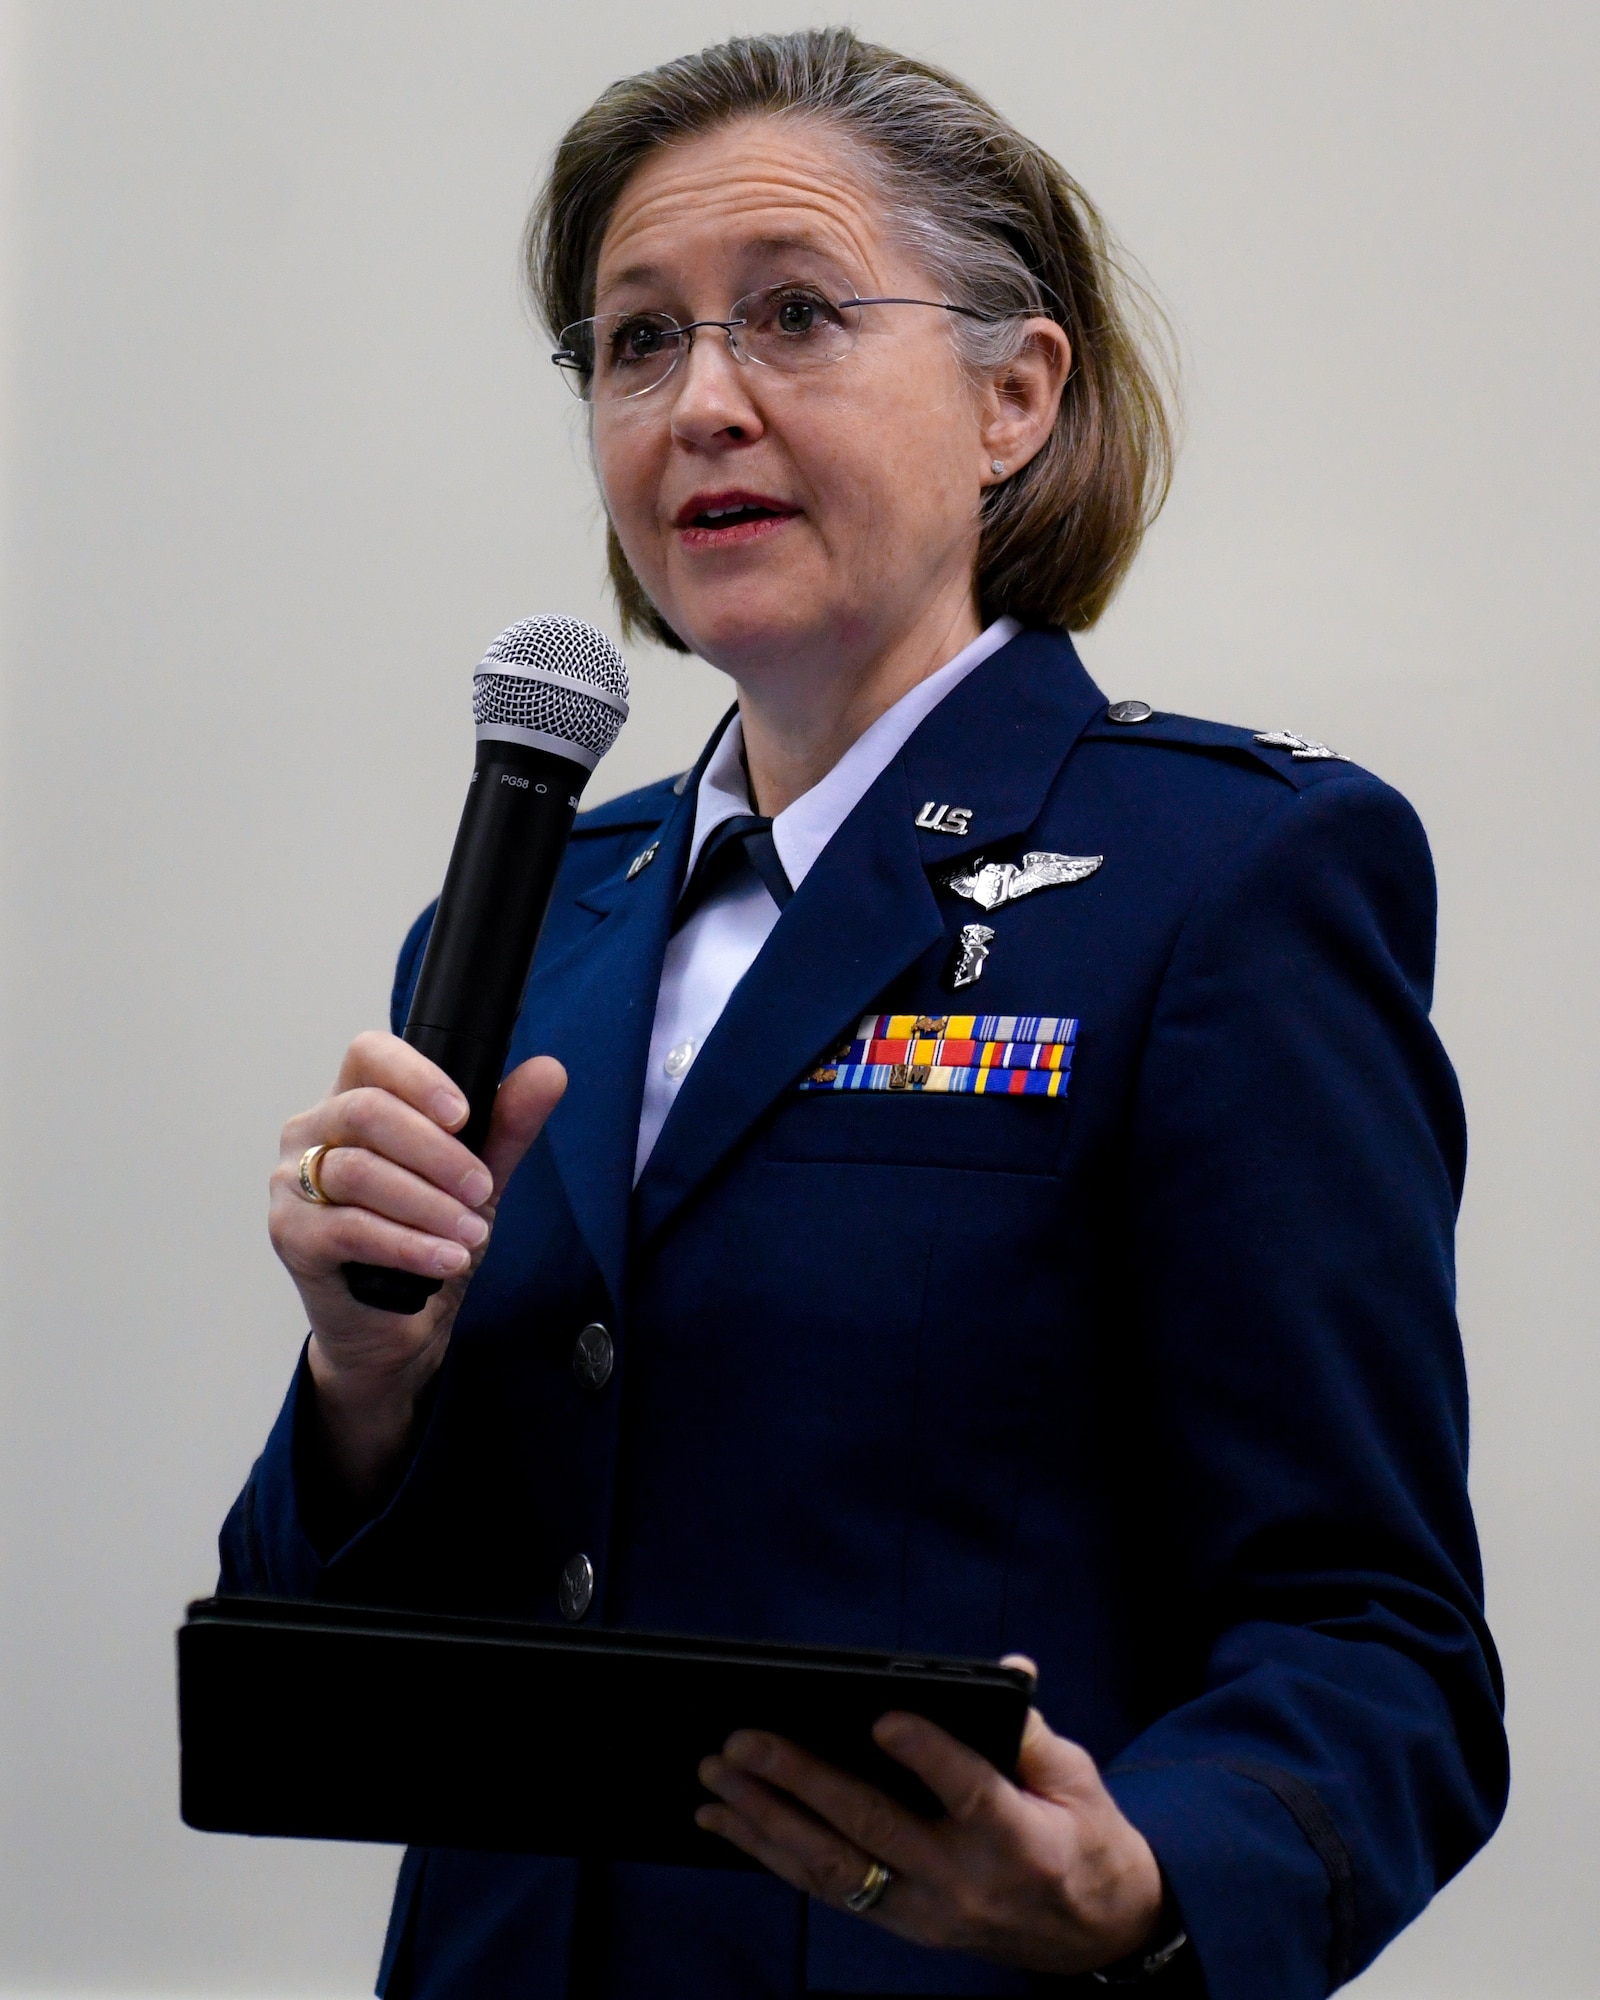 Col. Colleen E. Kelley, the new 910th Medical Squadron (MDS) Commander, addresses the 910th MDS during an assumption of command ceremony June 8, 2019, here.